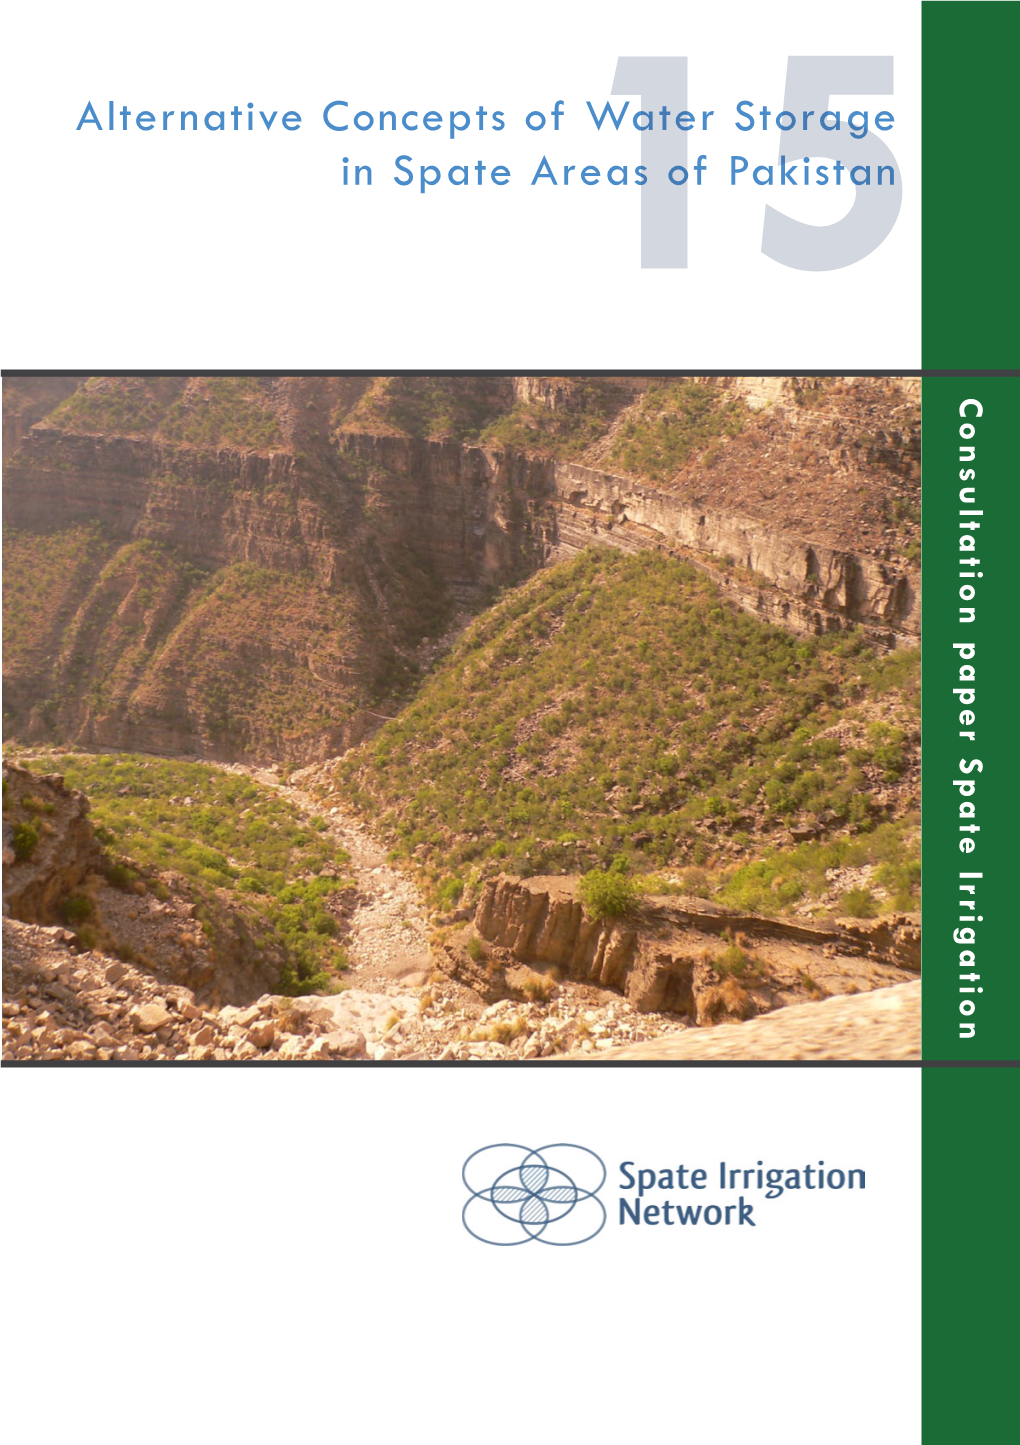 Alternative Concepts of Water Storage in Spate Areas of Pakistan